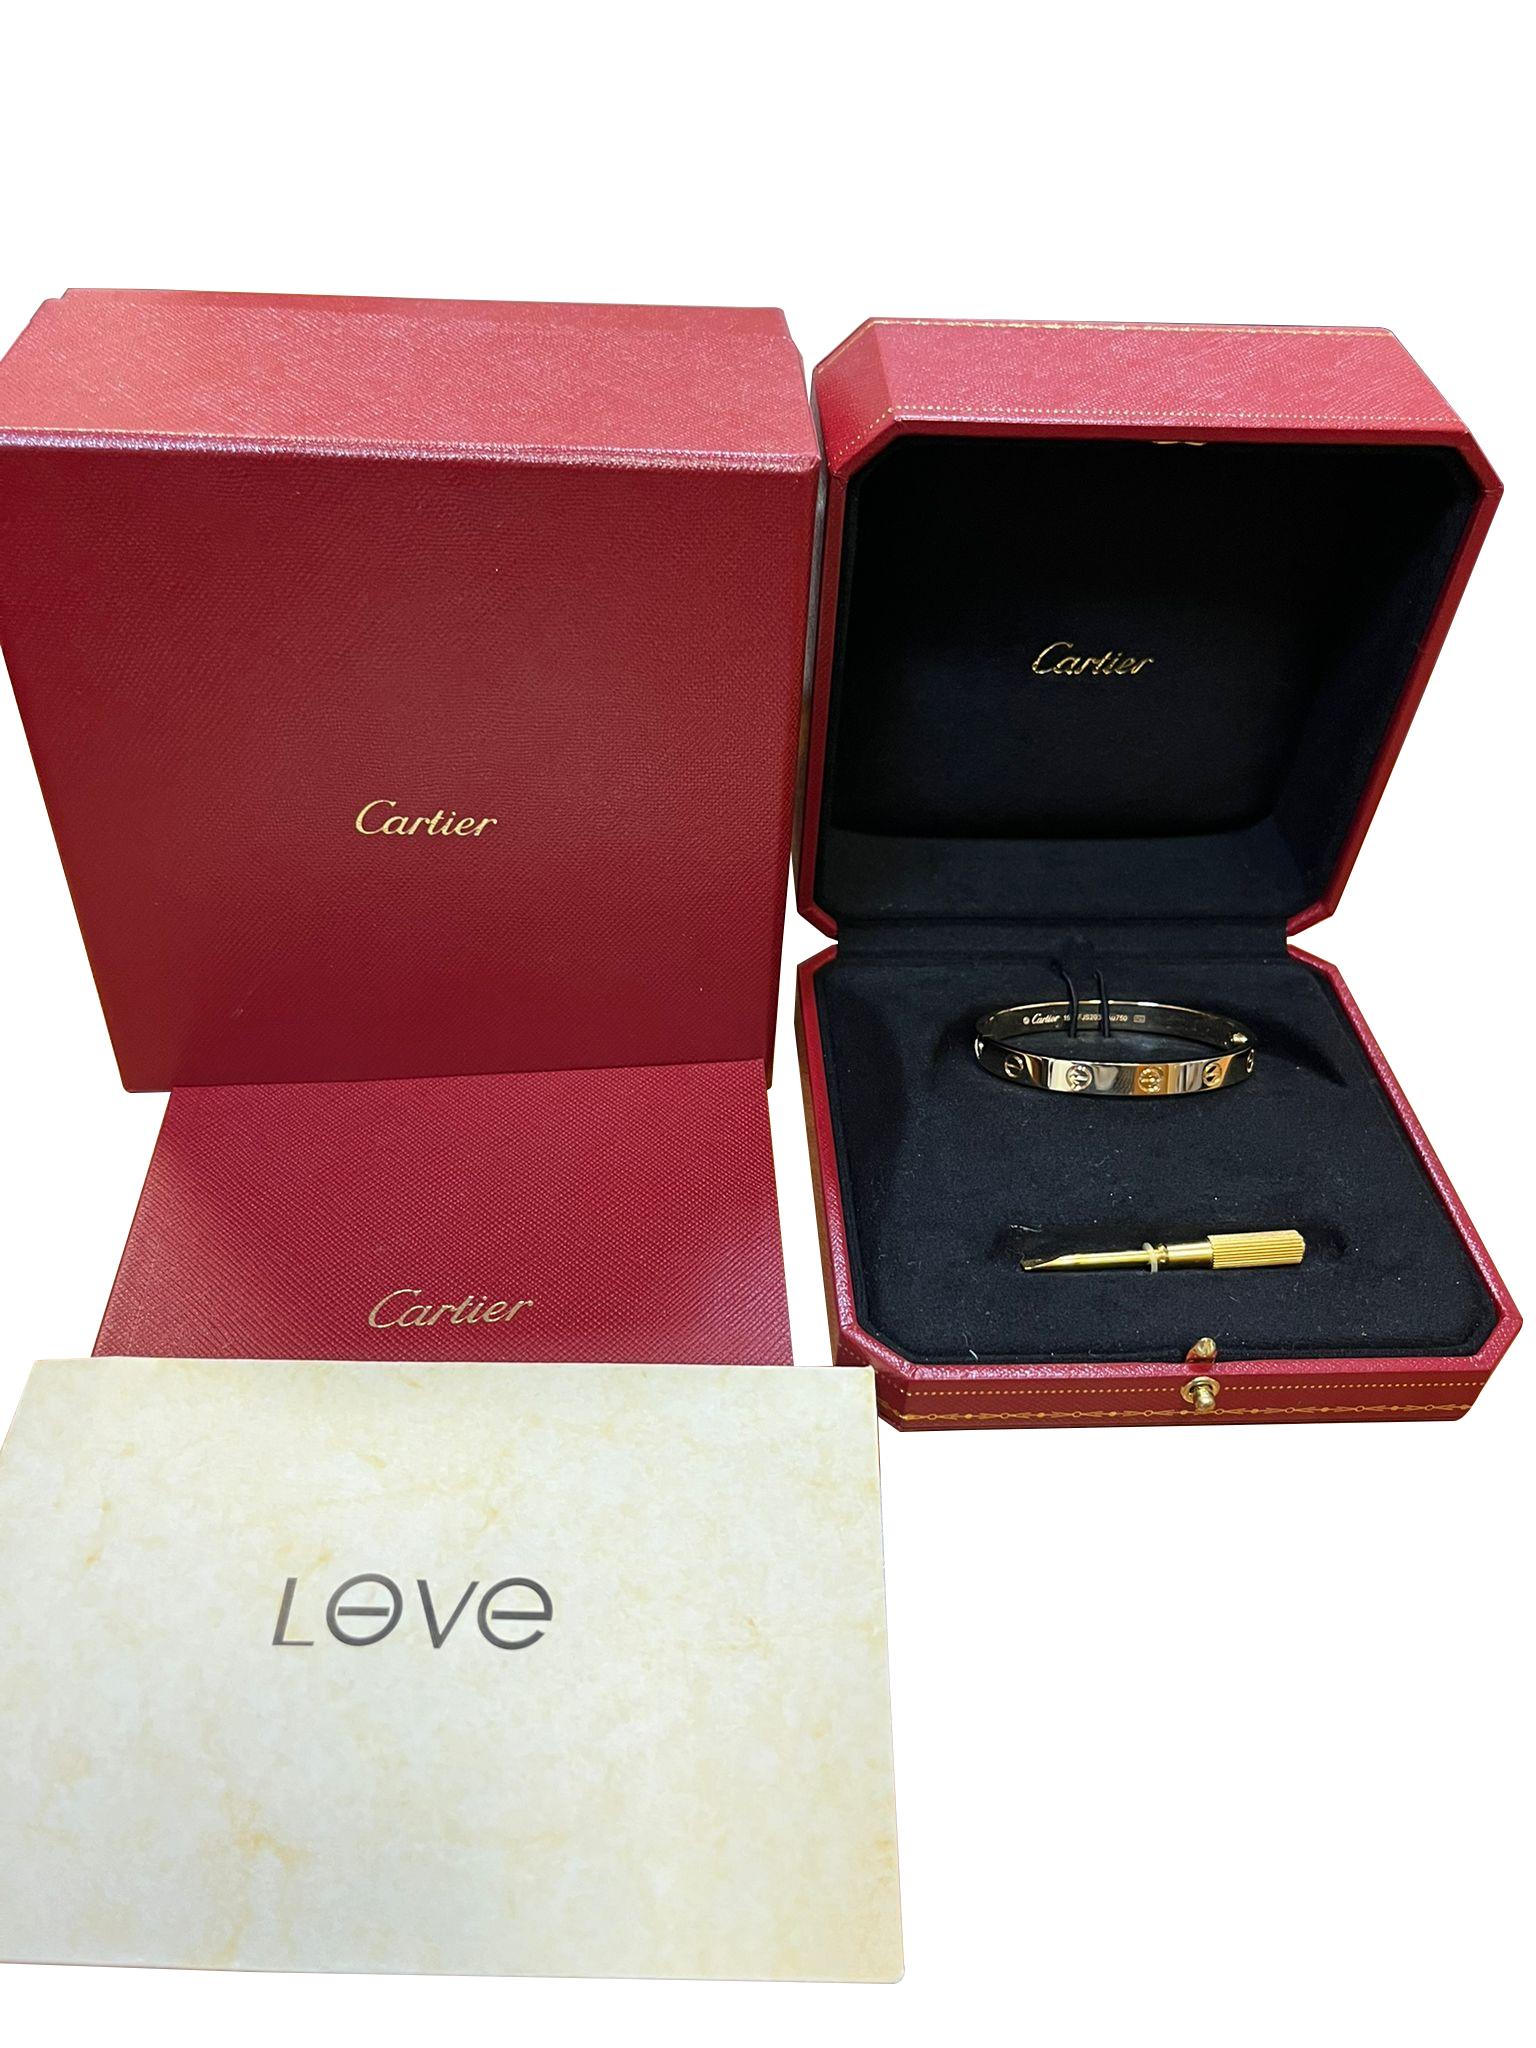 Cartier Love Bracelet 18K Yellow Gold Size 15 Brushed Finish with Screwdriver For Sale 1